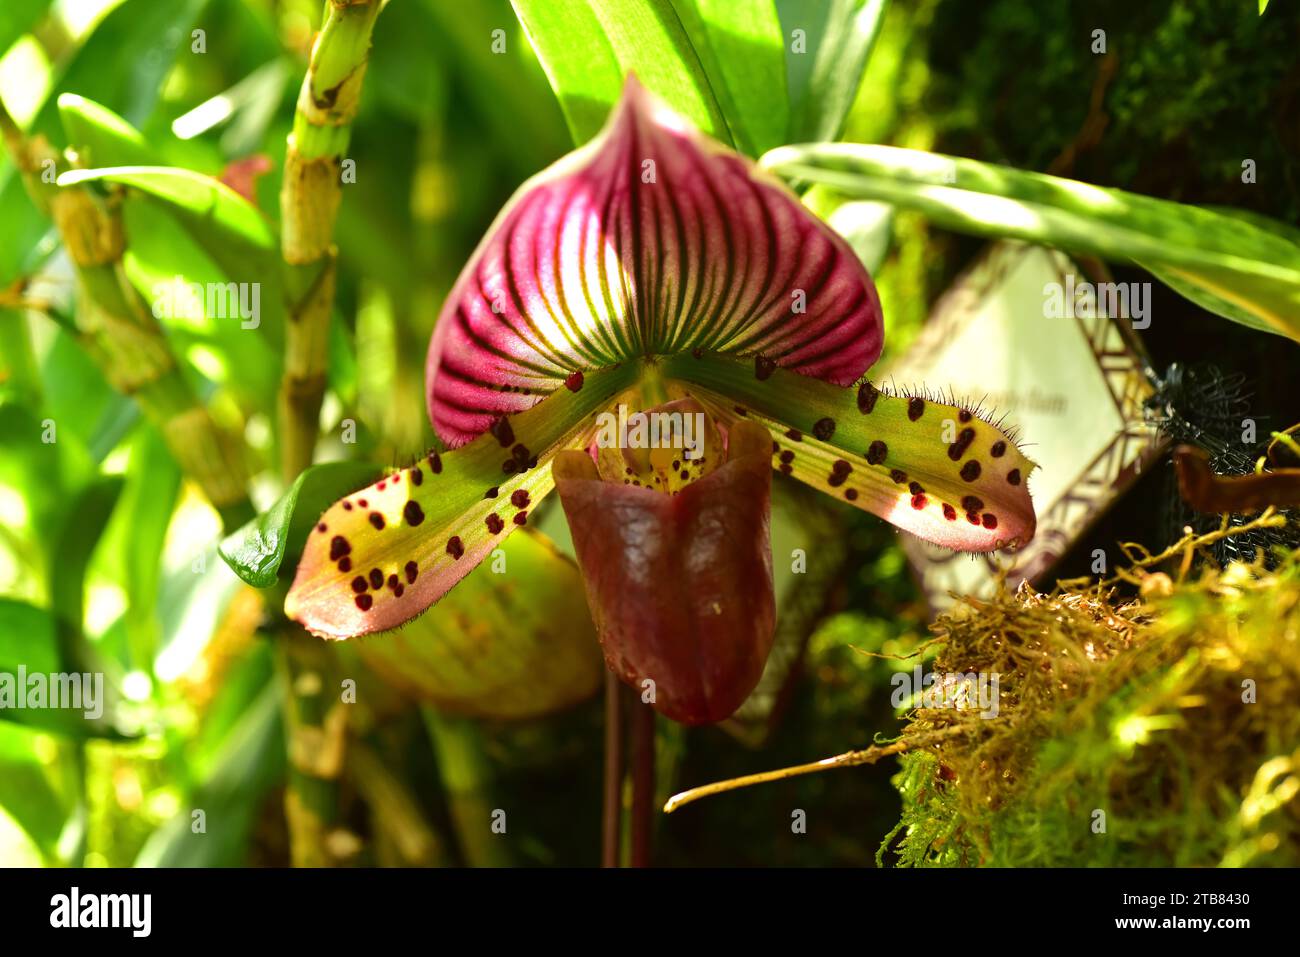 Paphiopedilum acmodontum is an ornamental orchid endemic to Philippines. Stock Photo